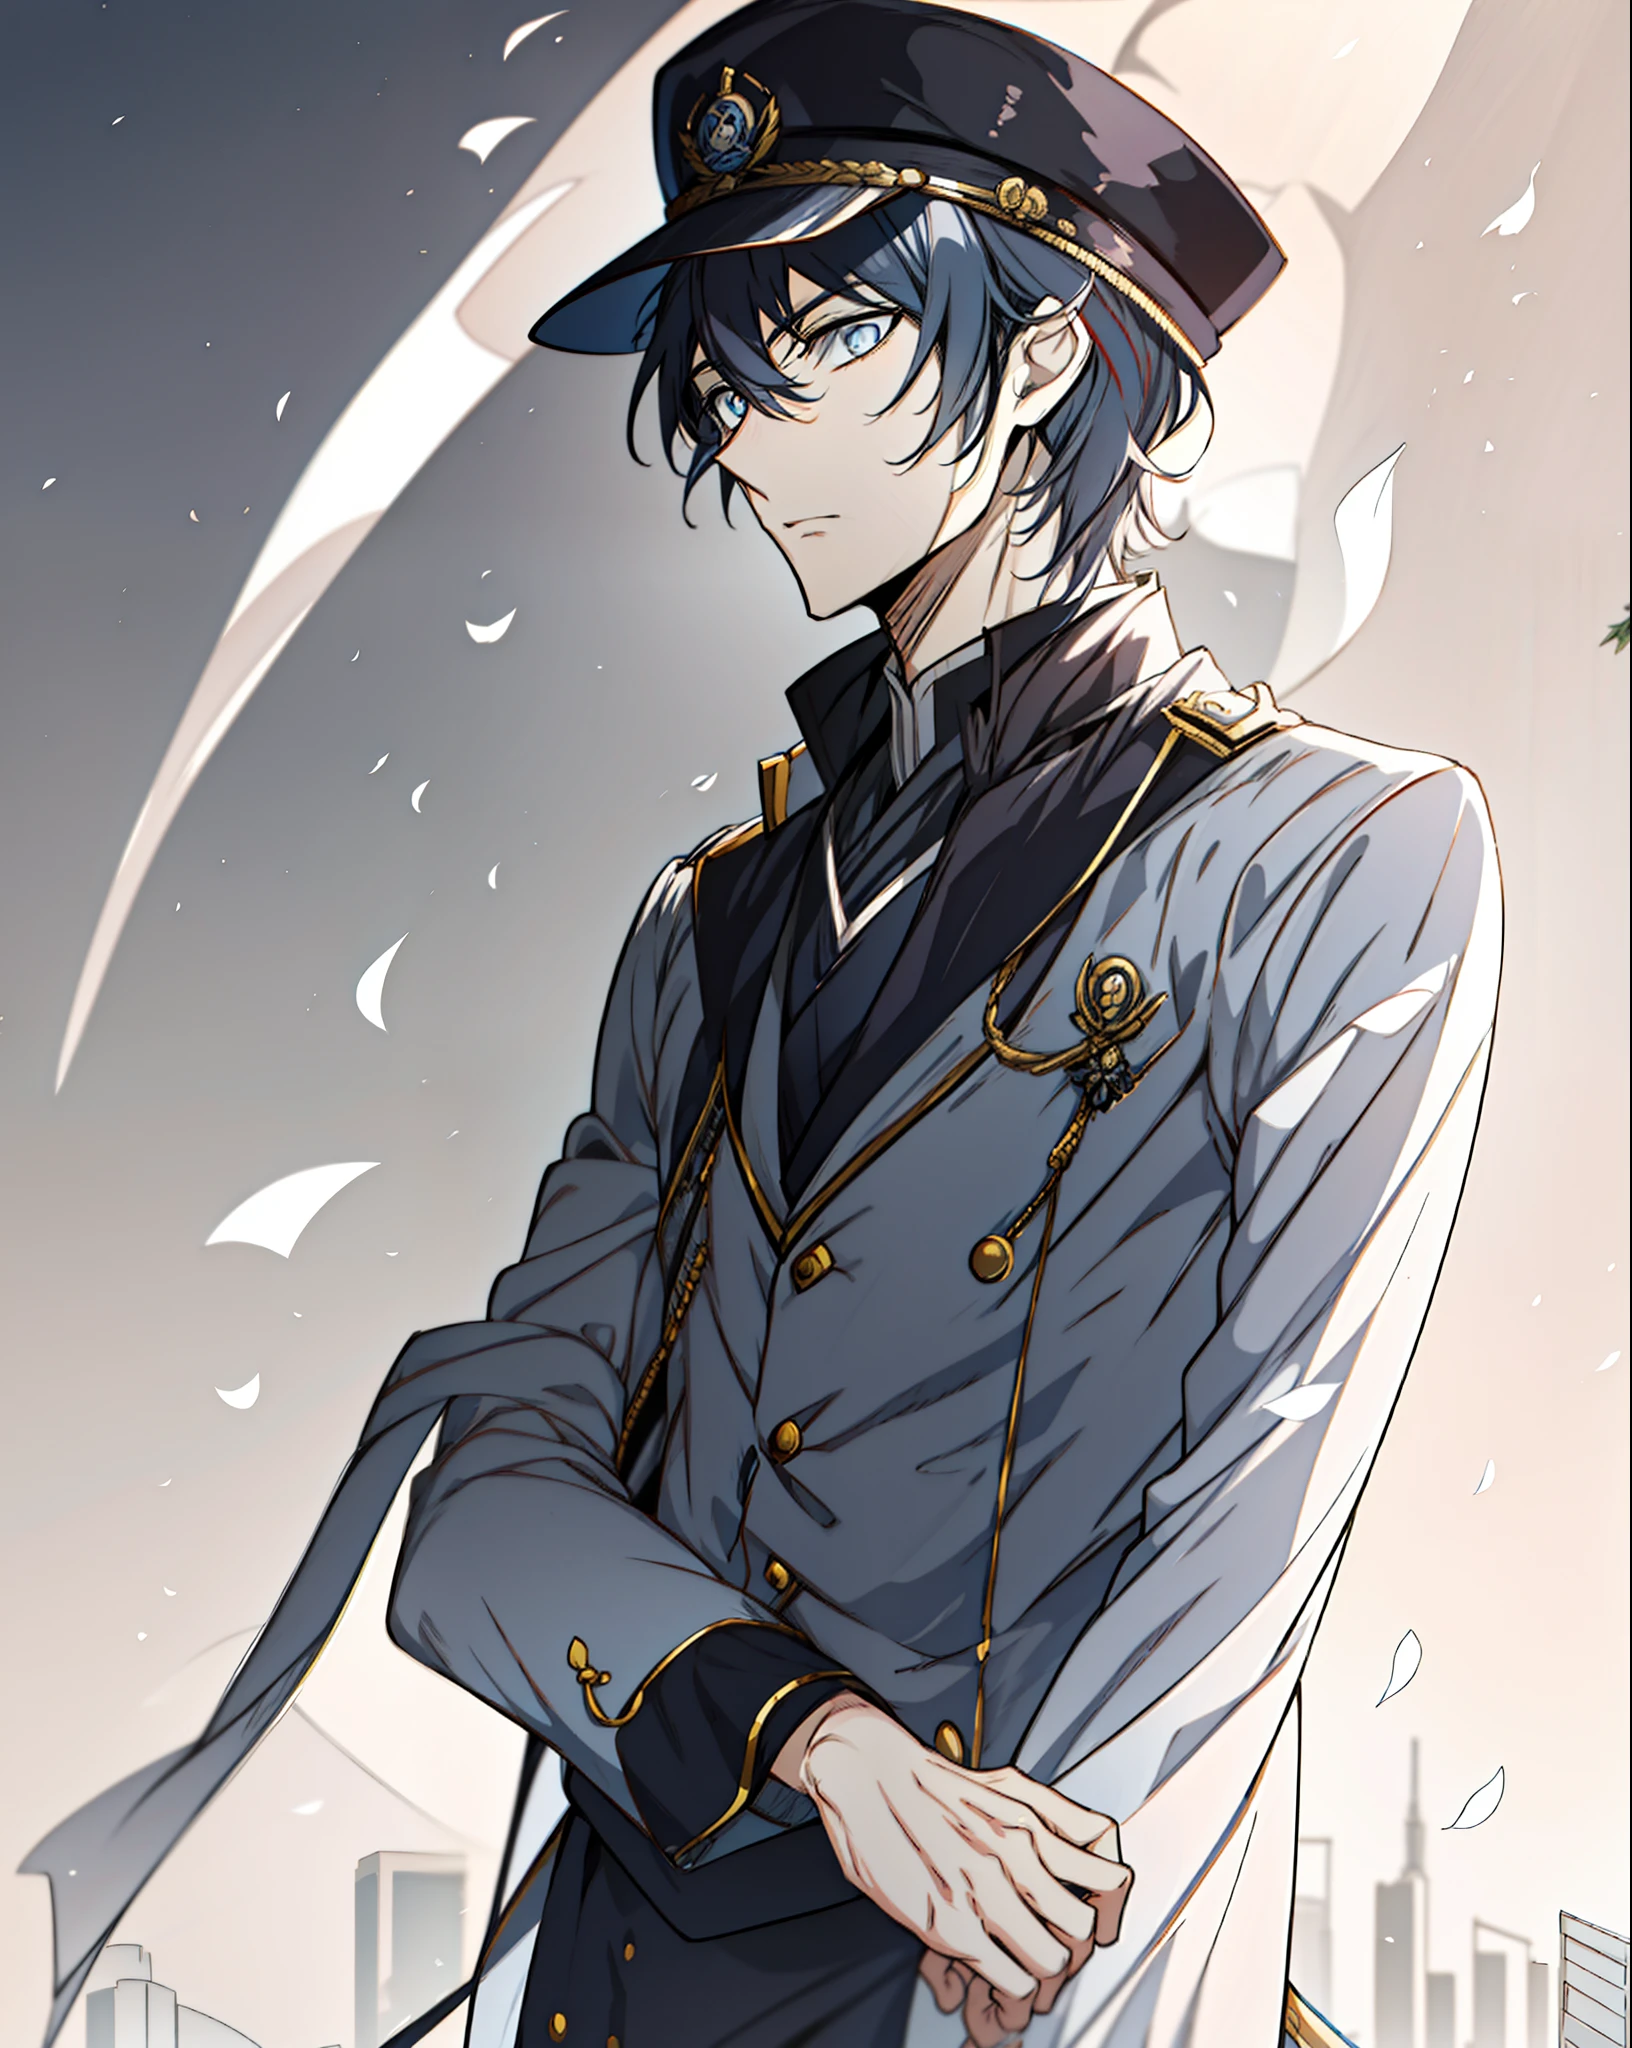 Anime characters standing in front of the city in uniform, Delicate male, Handsome anime pose, Anime handsome man, inspired by Okumura Togyu, he is wearing a top hat, inspired by Yamagata Hiro, Tall anime man with golden eyes